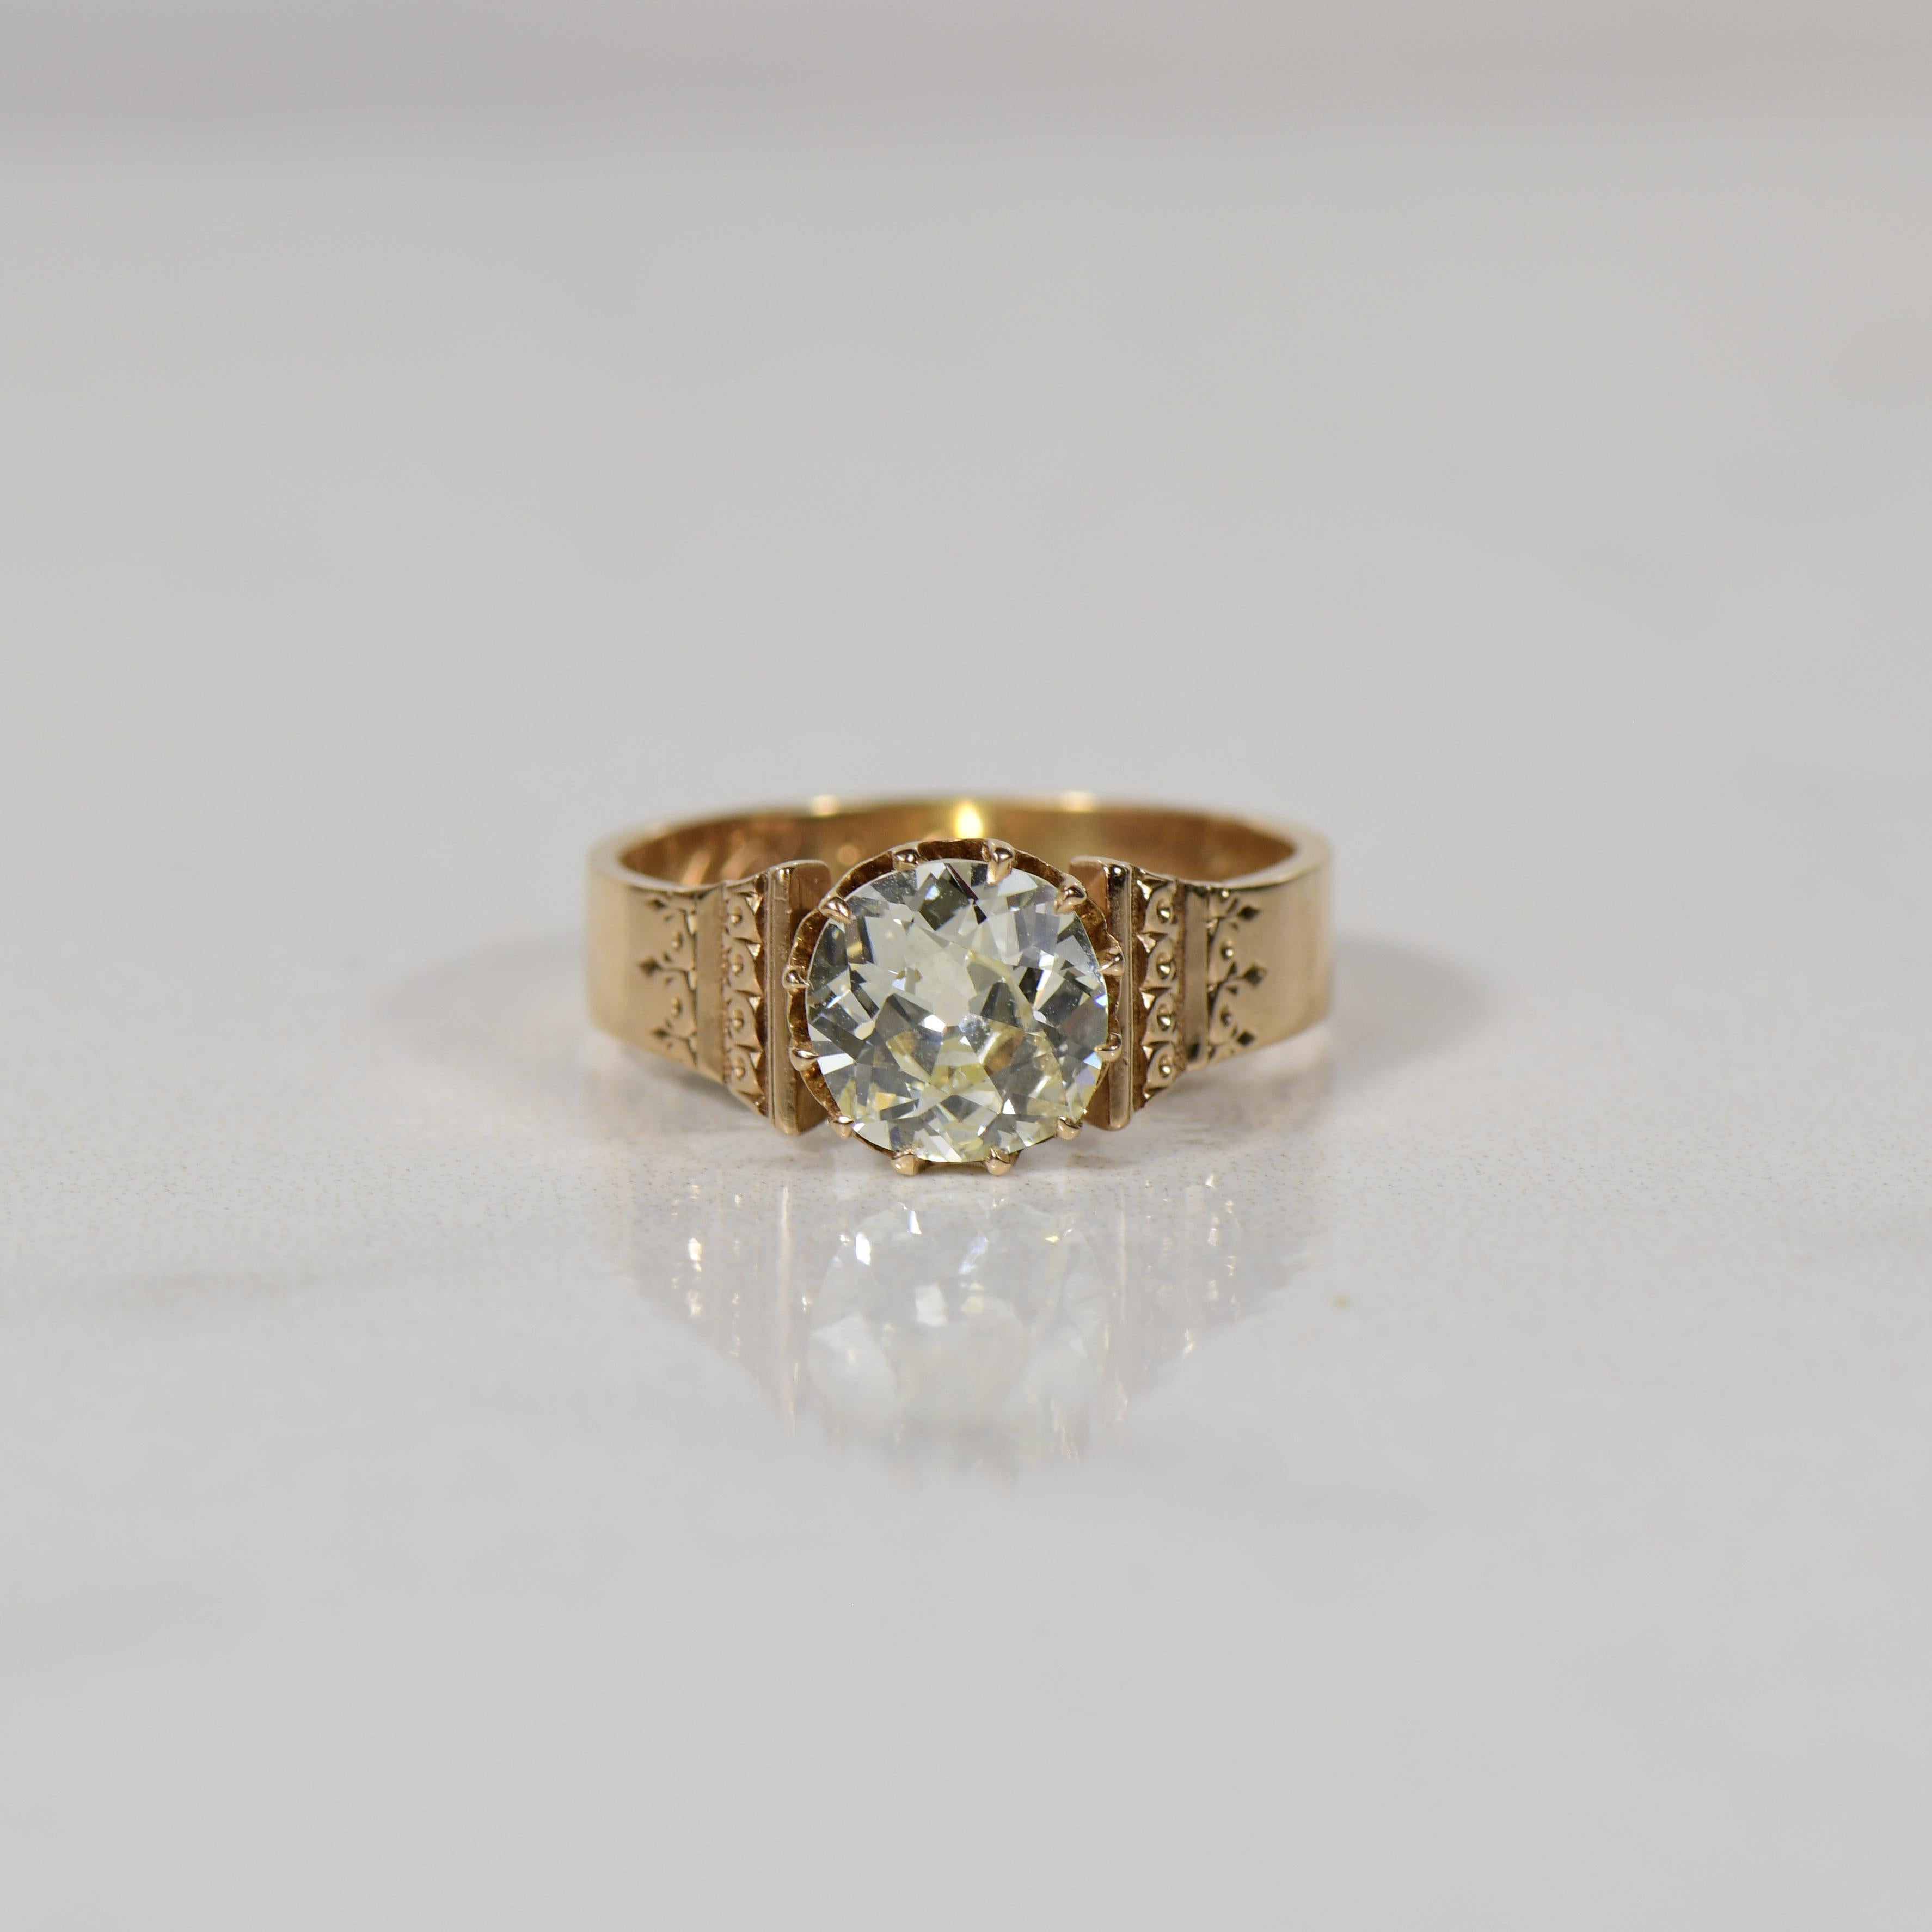 This exquisite 14K Rose Gold Victorian engagement ring boasts a dazzling 1.7-carat diamond, capturing the essence of timeless romance and sophistication. The ring is meticulously engraved with the initials 